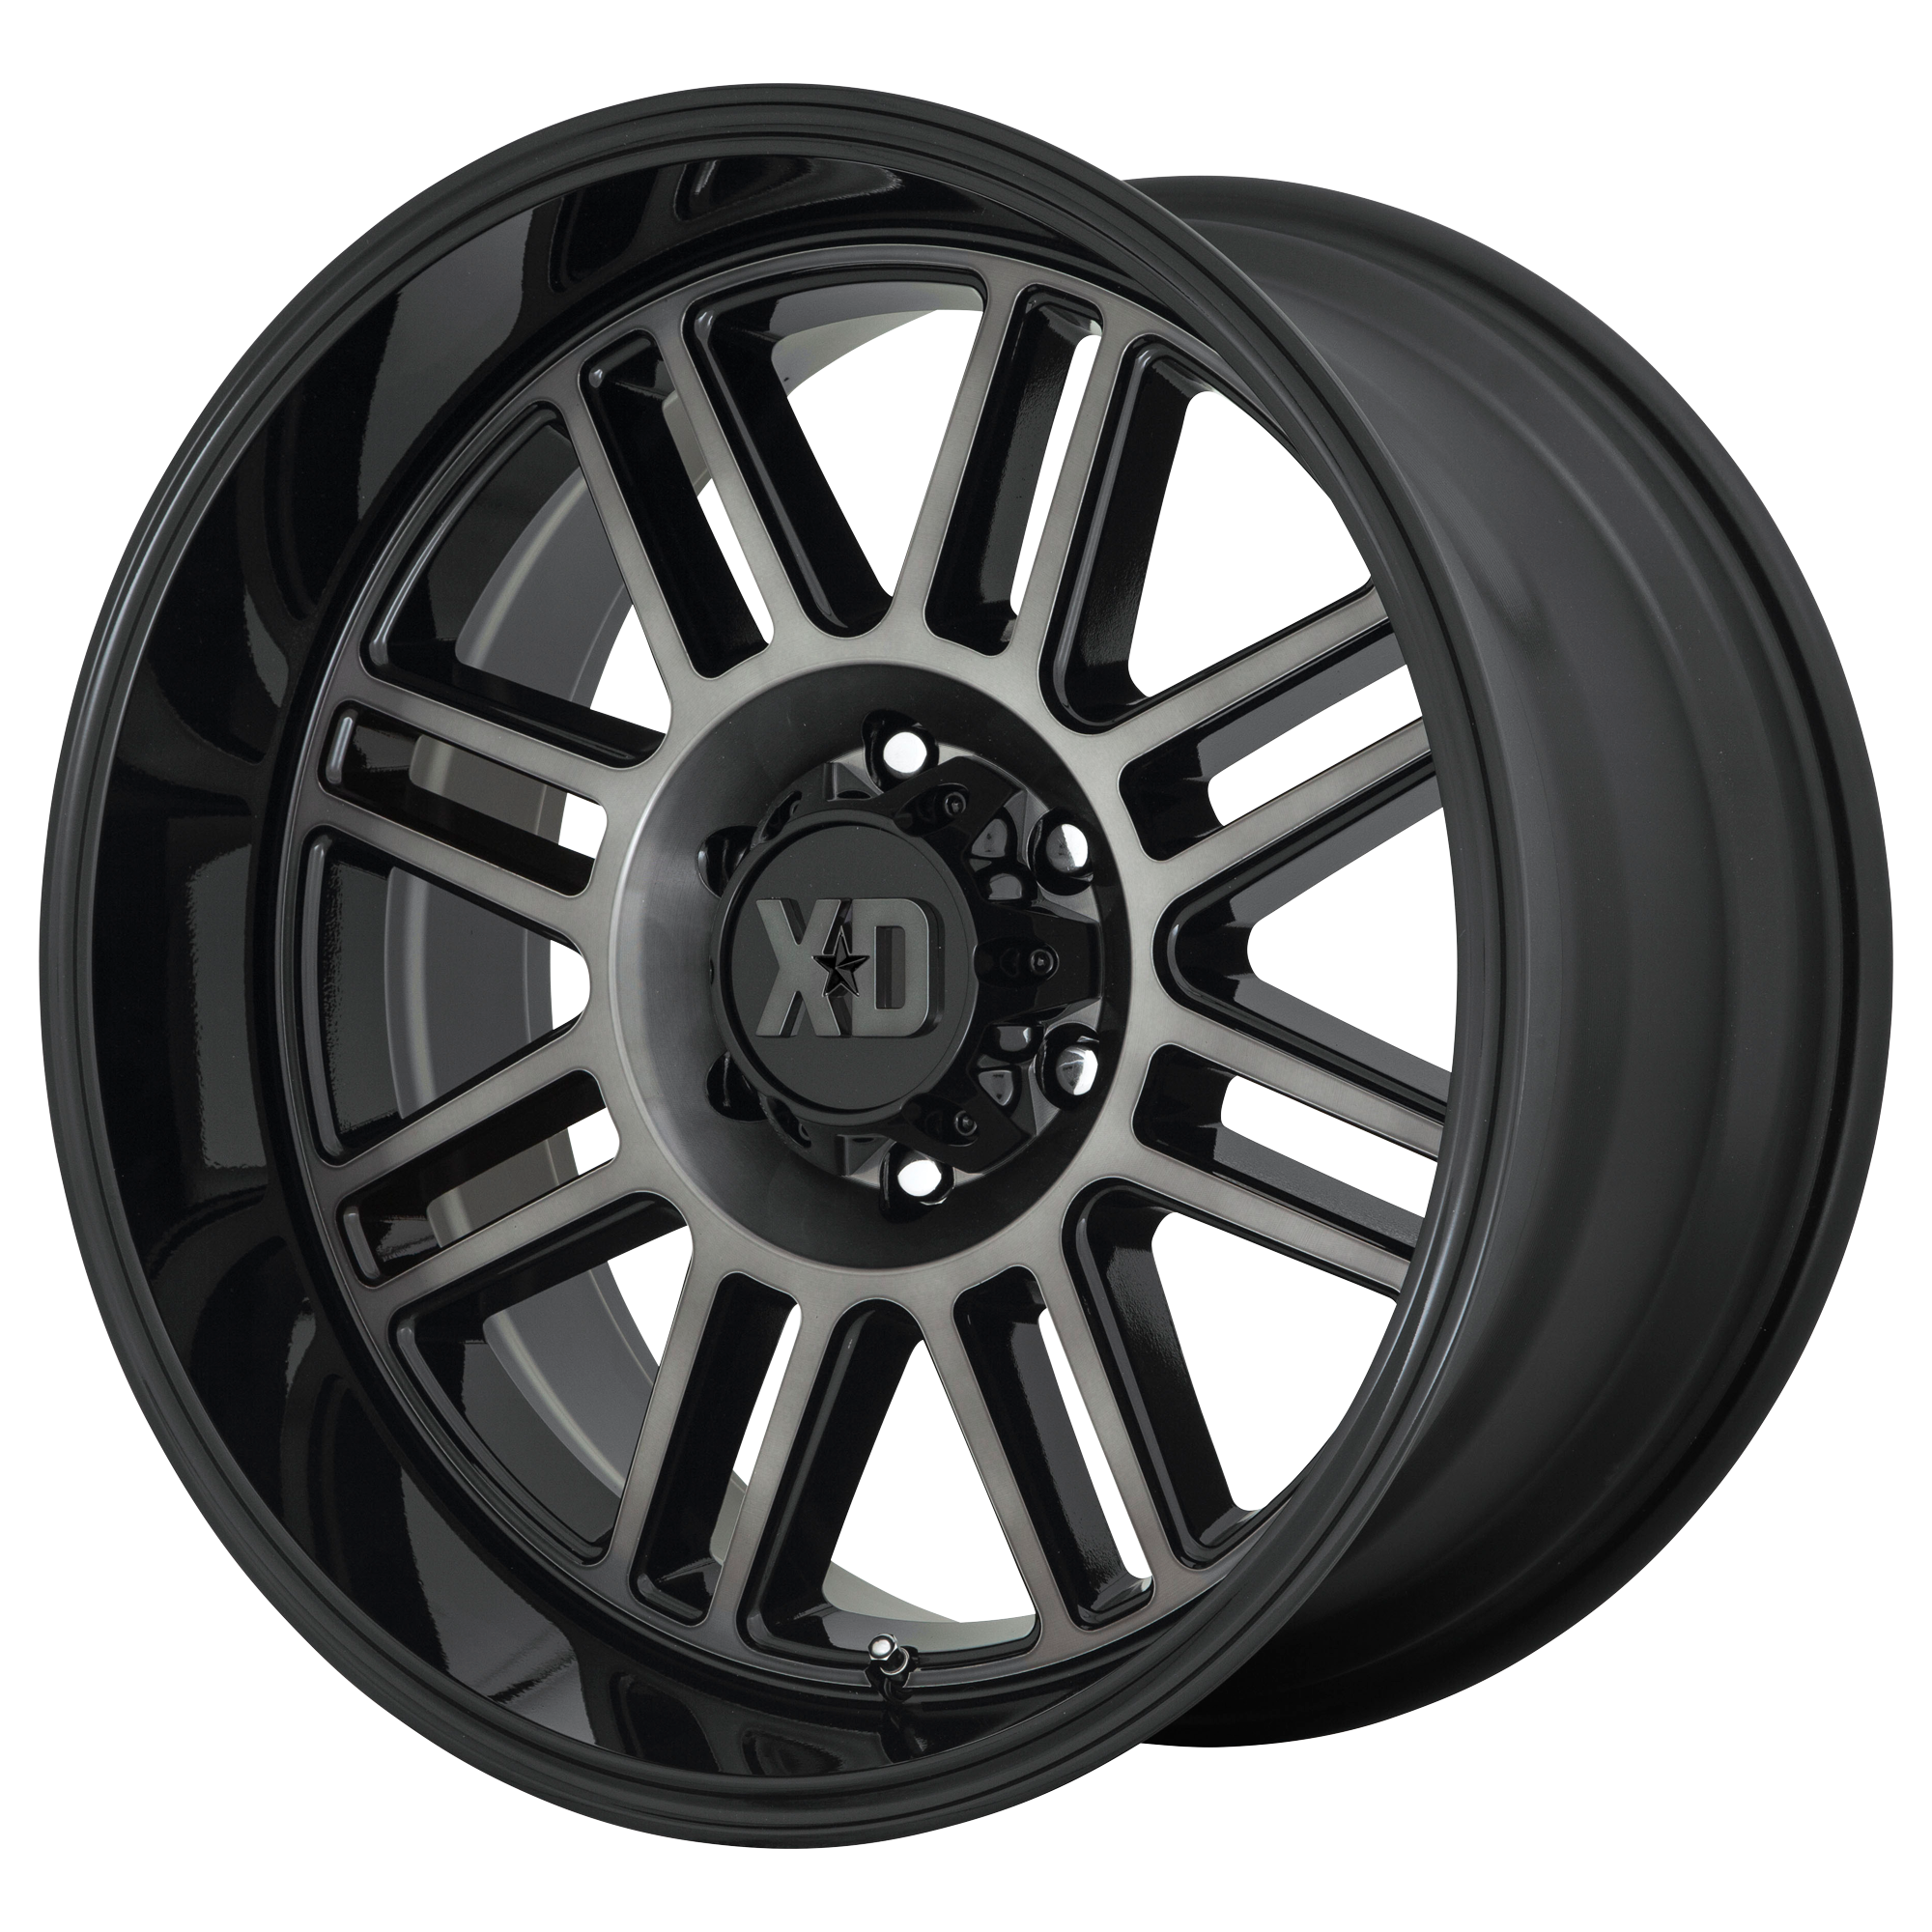 CAGE 22x10 8x165.10 GLOSS BLACK W/ GRAY TINT (-18 mm) - Tires and Engine Performance